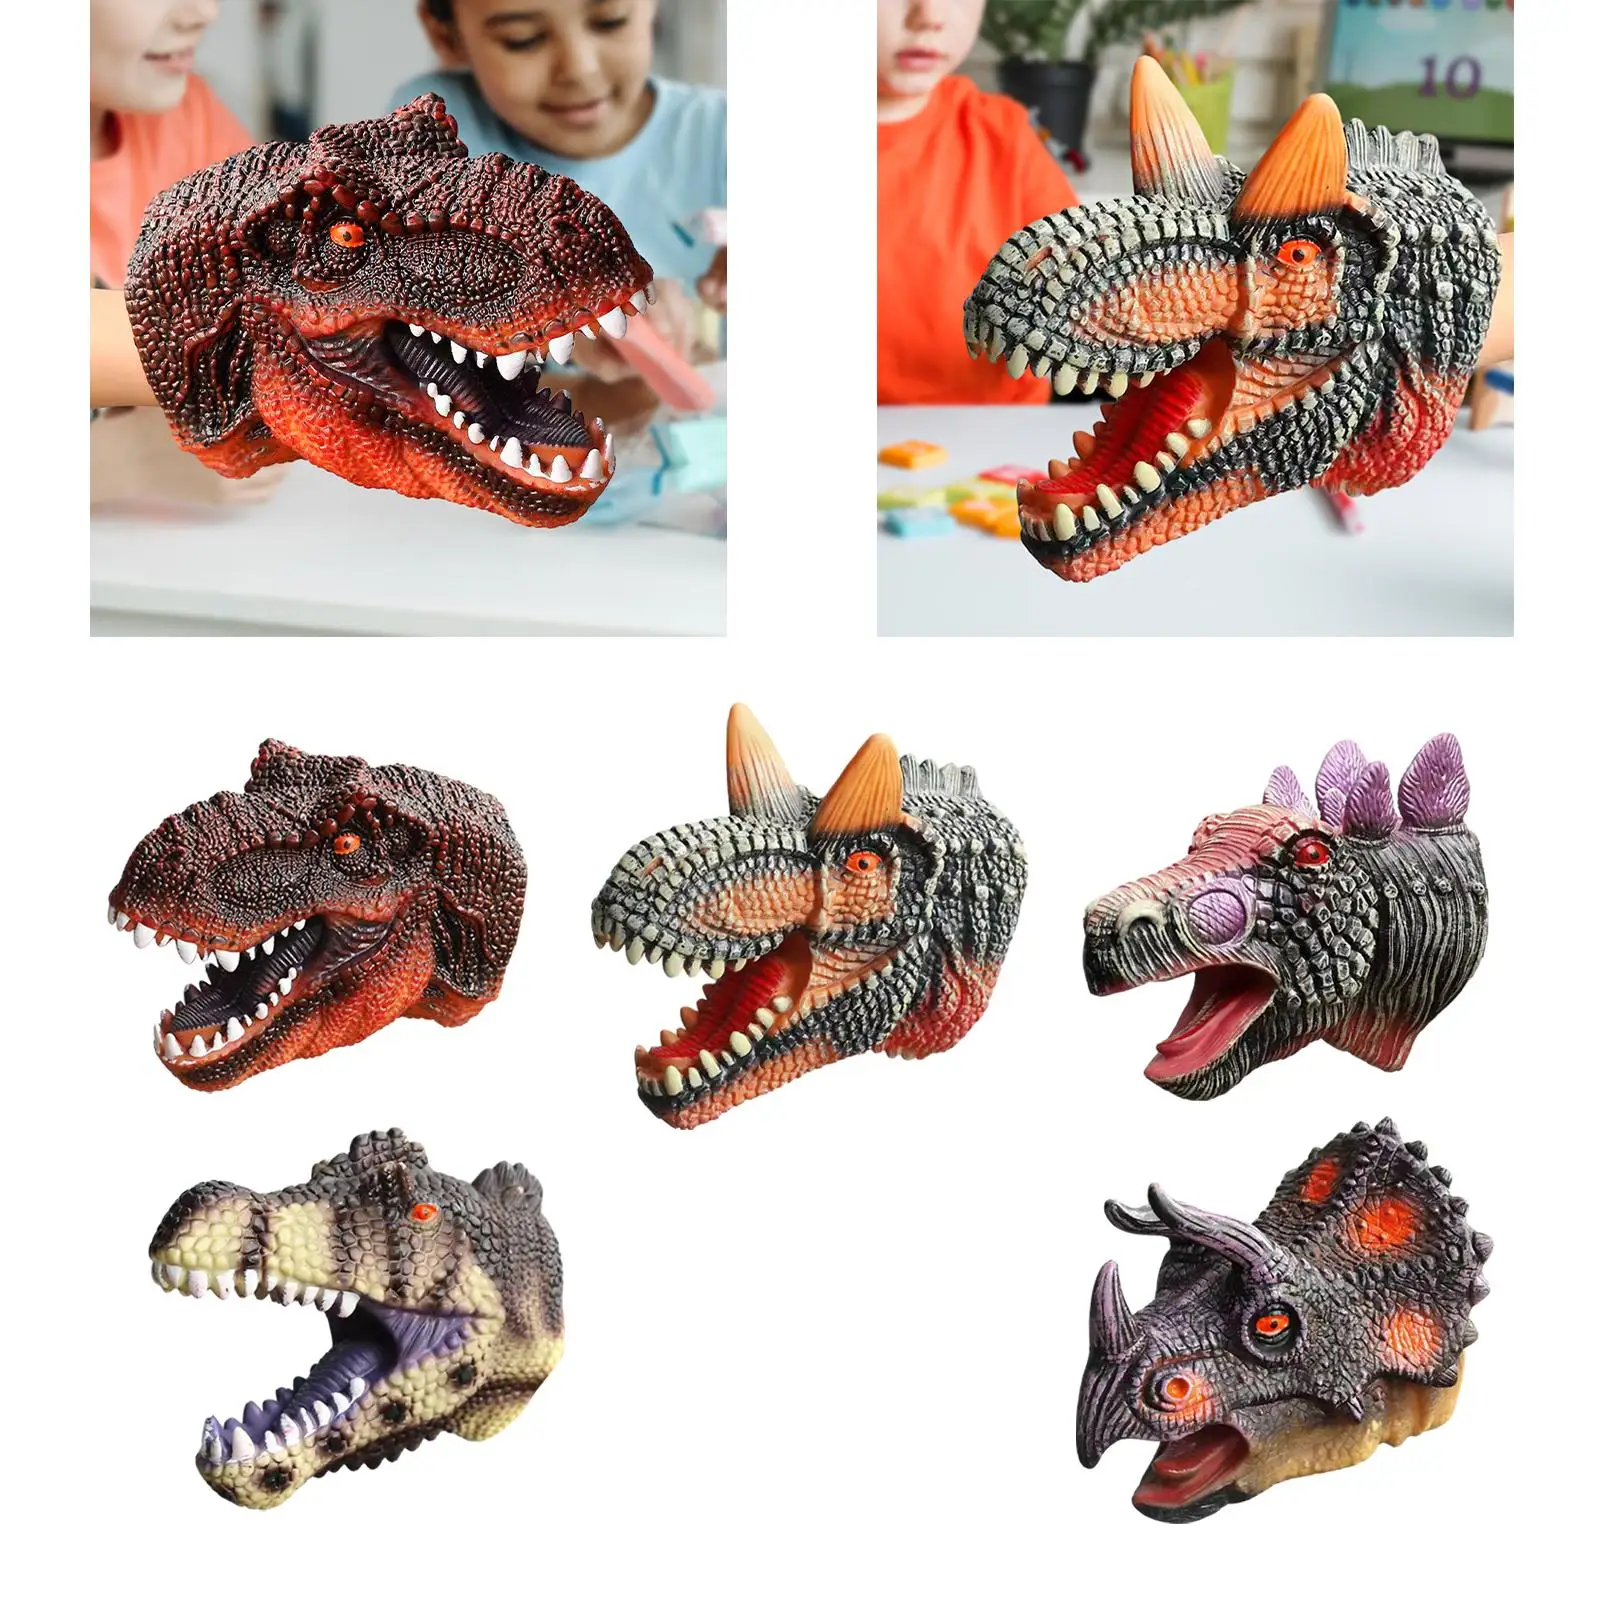 Dino Hand Puppet Soft Realistic Halloween Party Favor Simulation Hand Puppet for